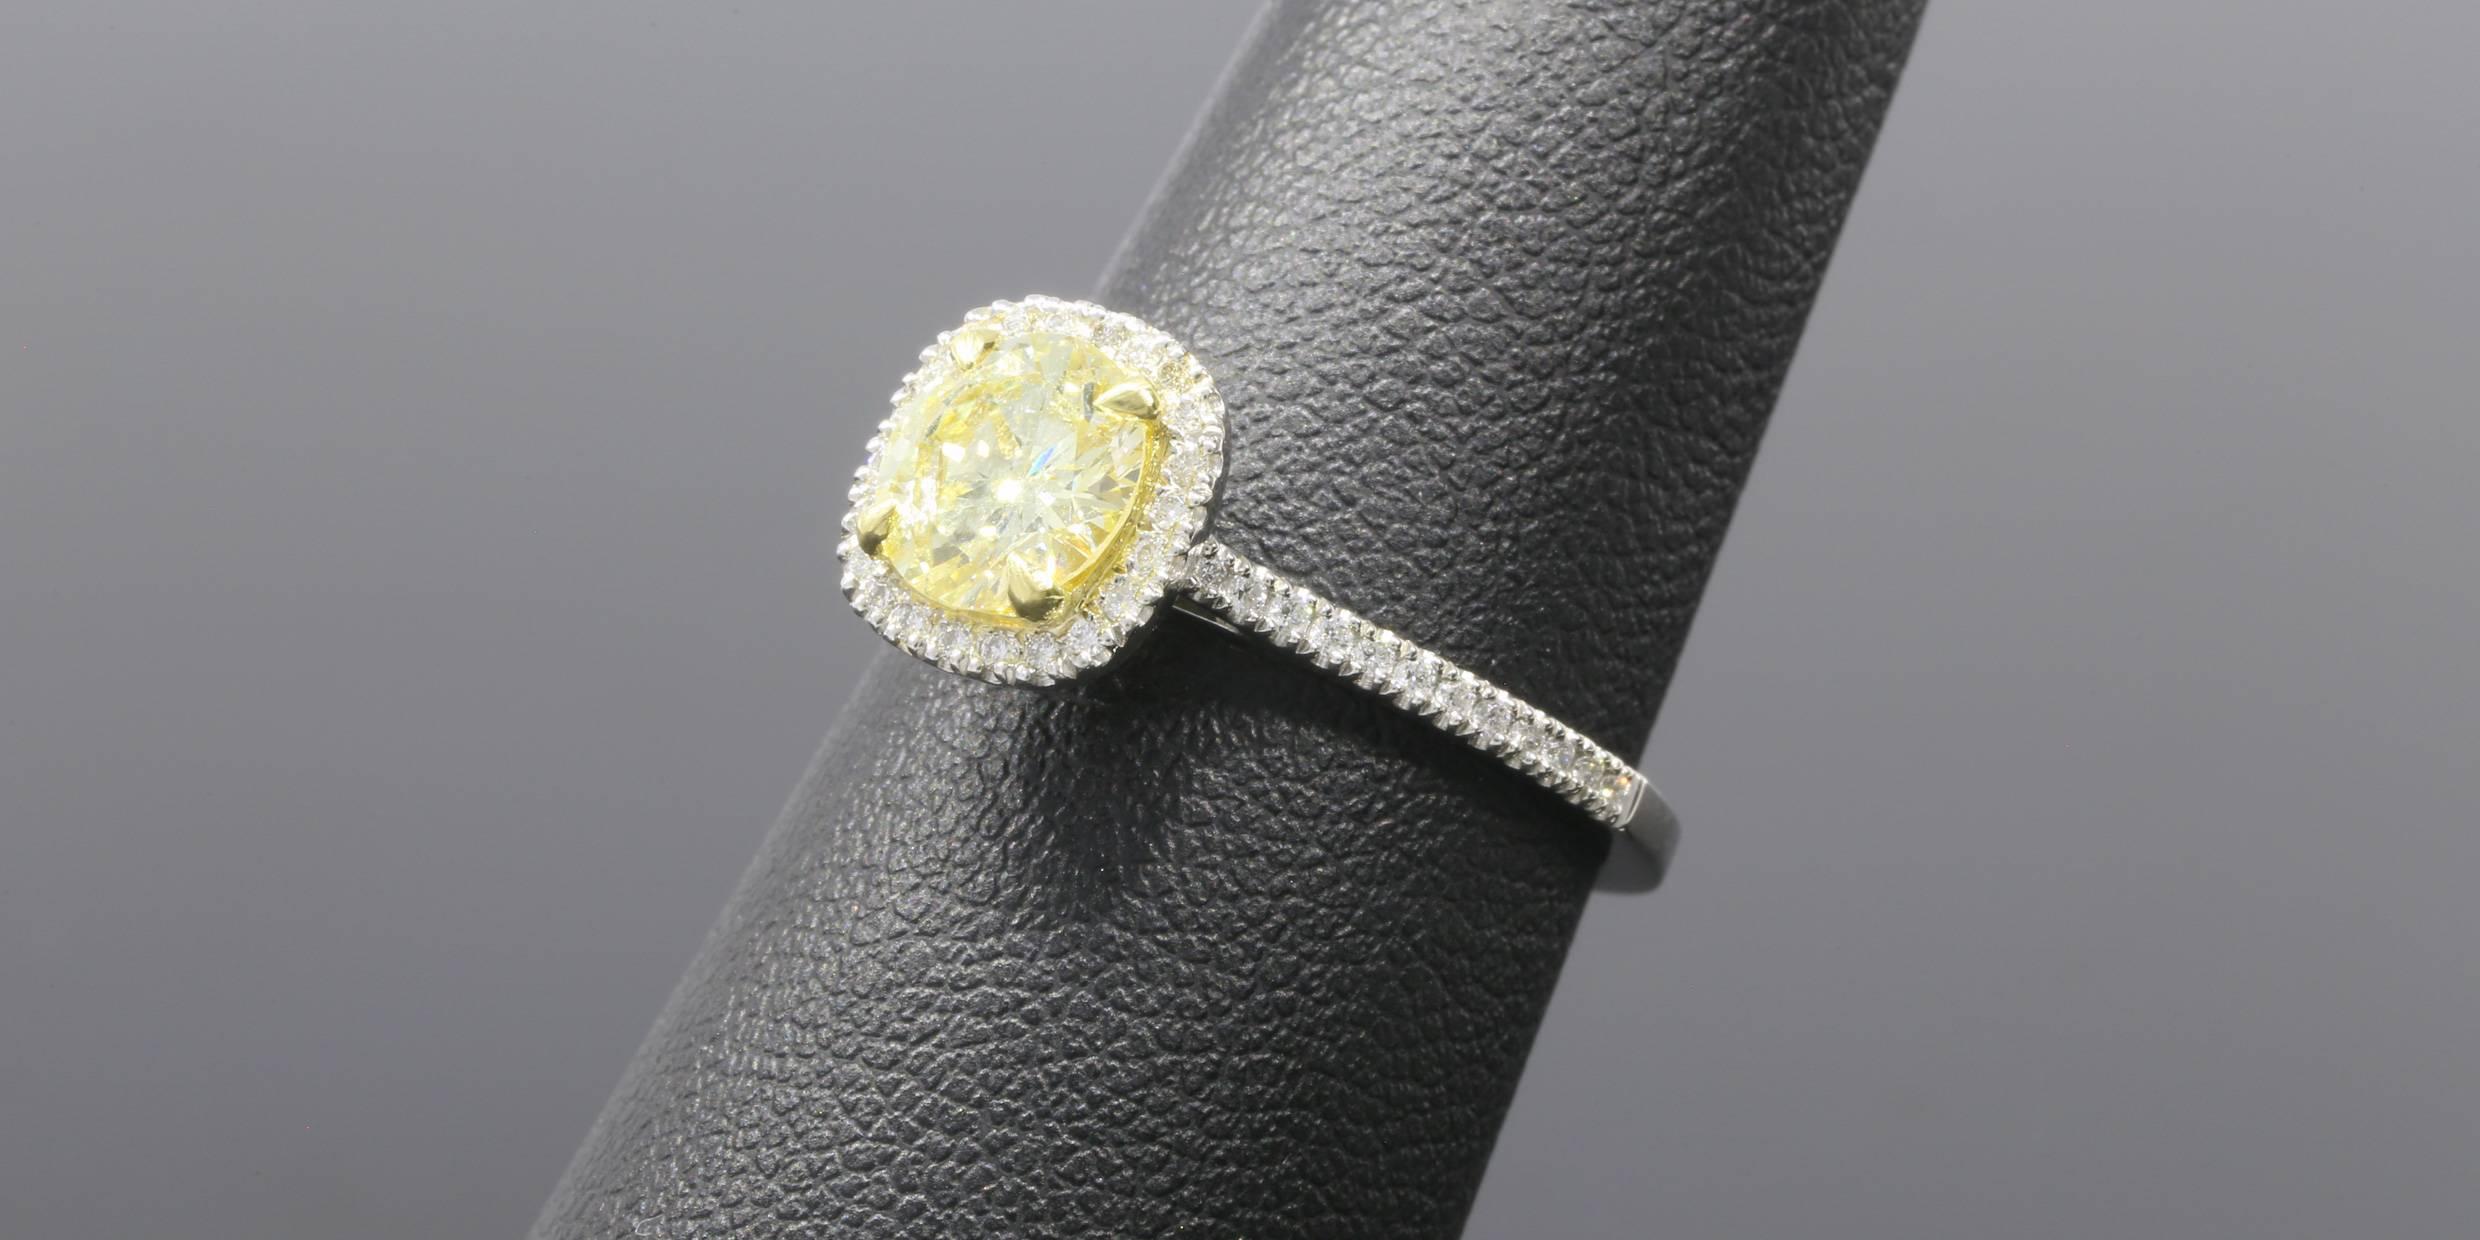 The ring features one round brilliant cut fancy yellow light diamond weighing 1.10 carats. The diamond has a lab report from the Gemological Institute of America and bears the report number 6177292103. The diamond is rated as an I1 in clarity, but